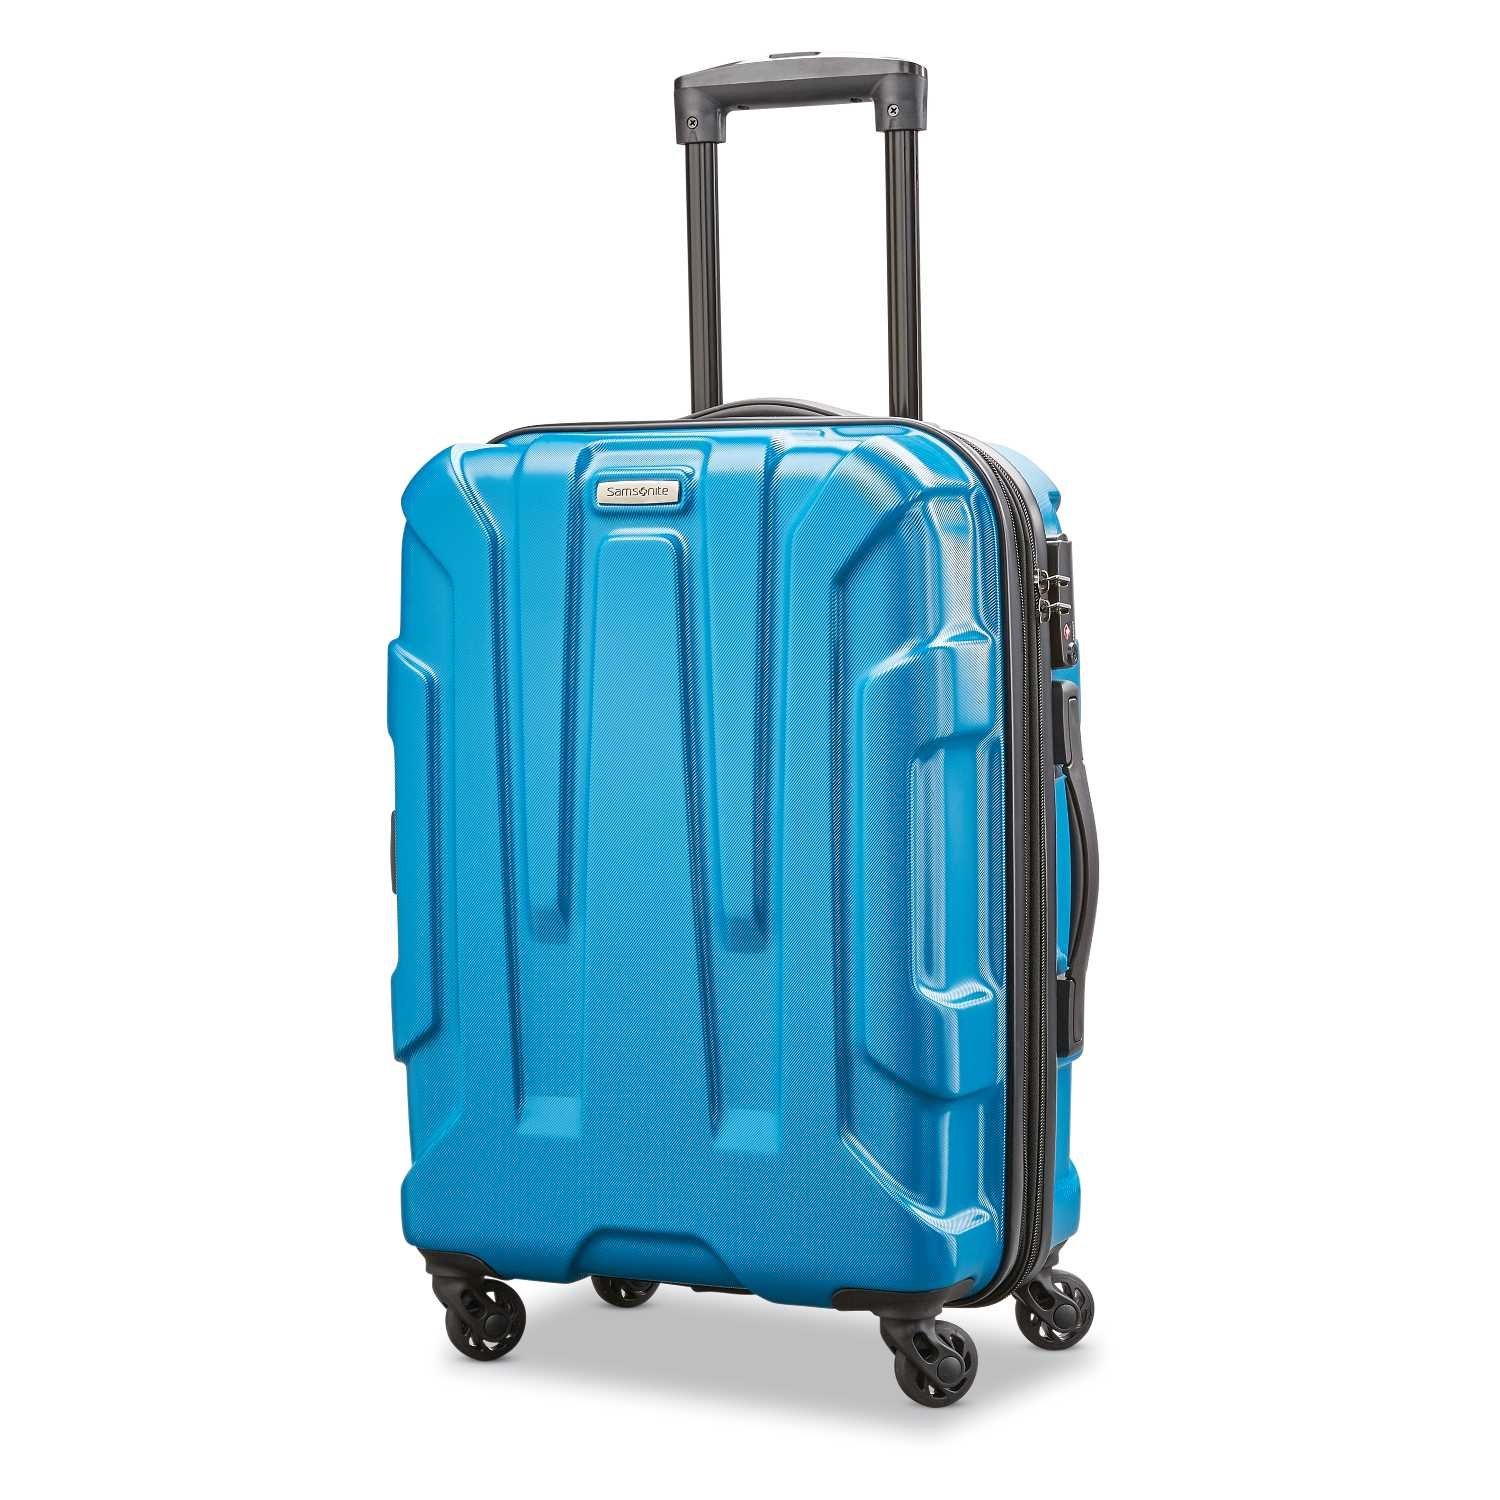 Best Deal of Samsonite Centric Hardside 20 Carry-On Luggage - NeuWish